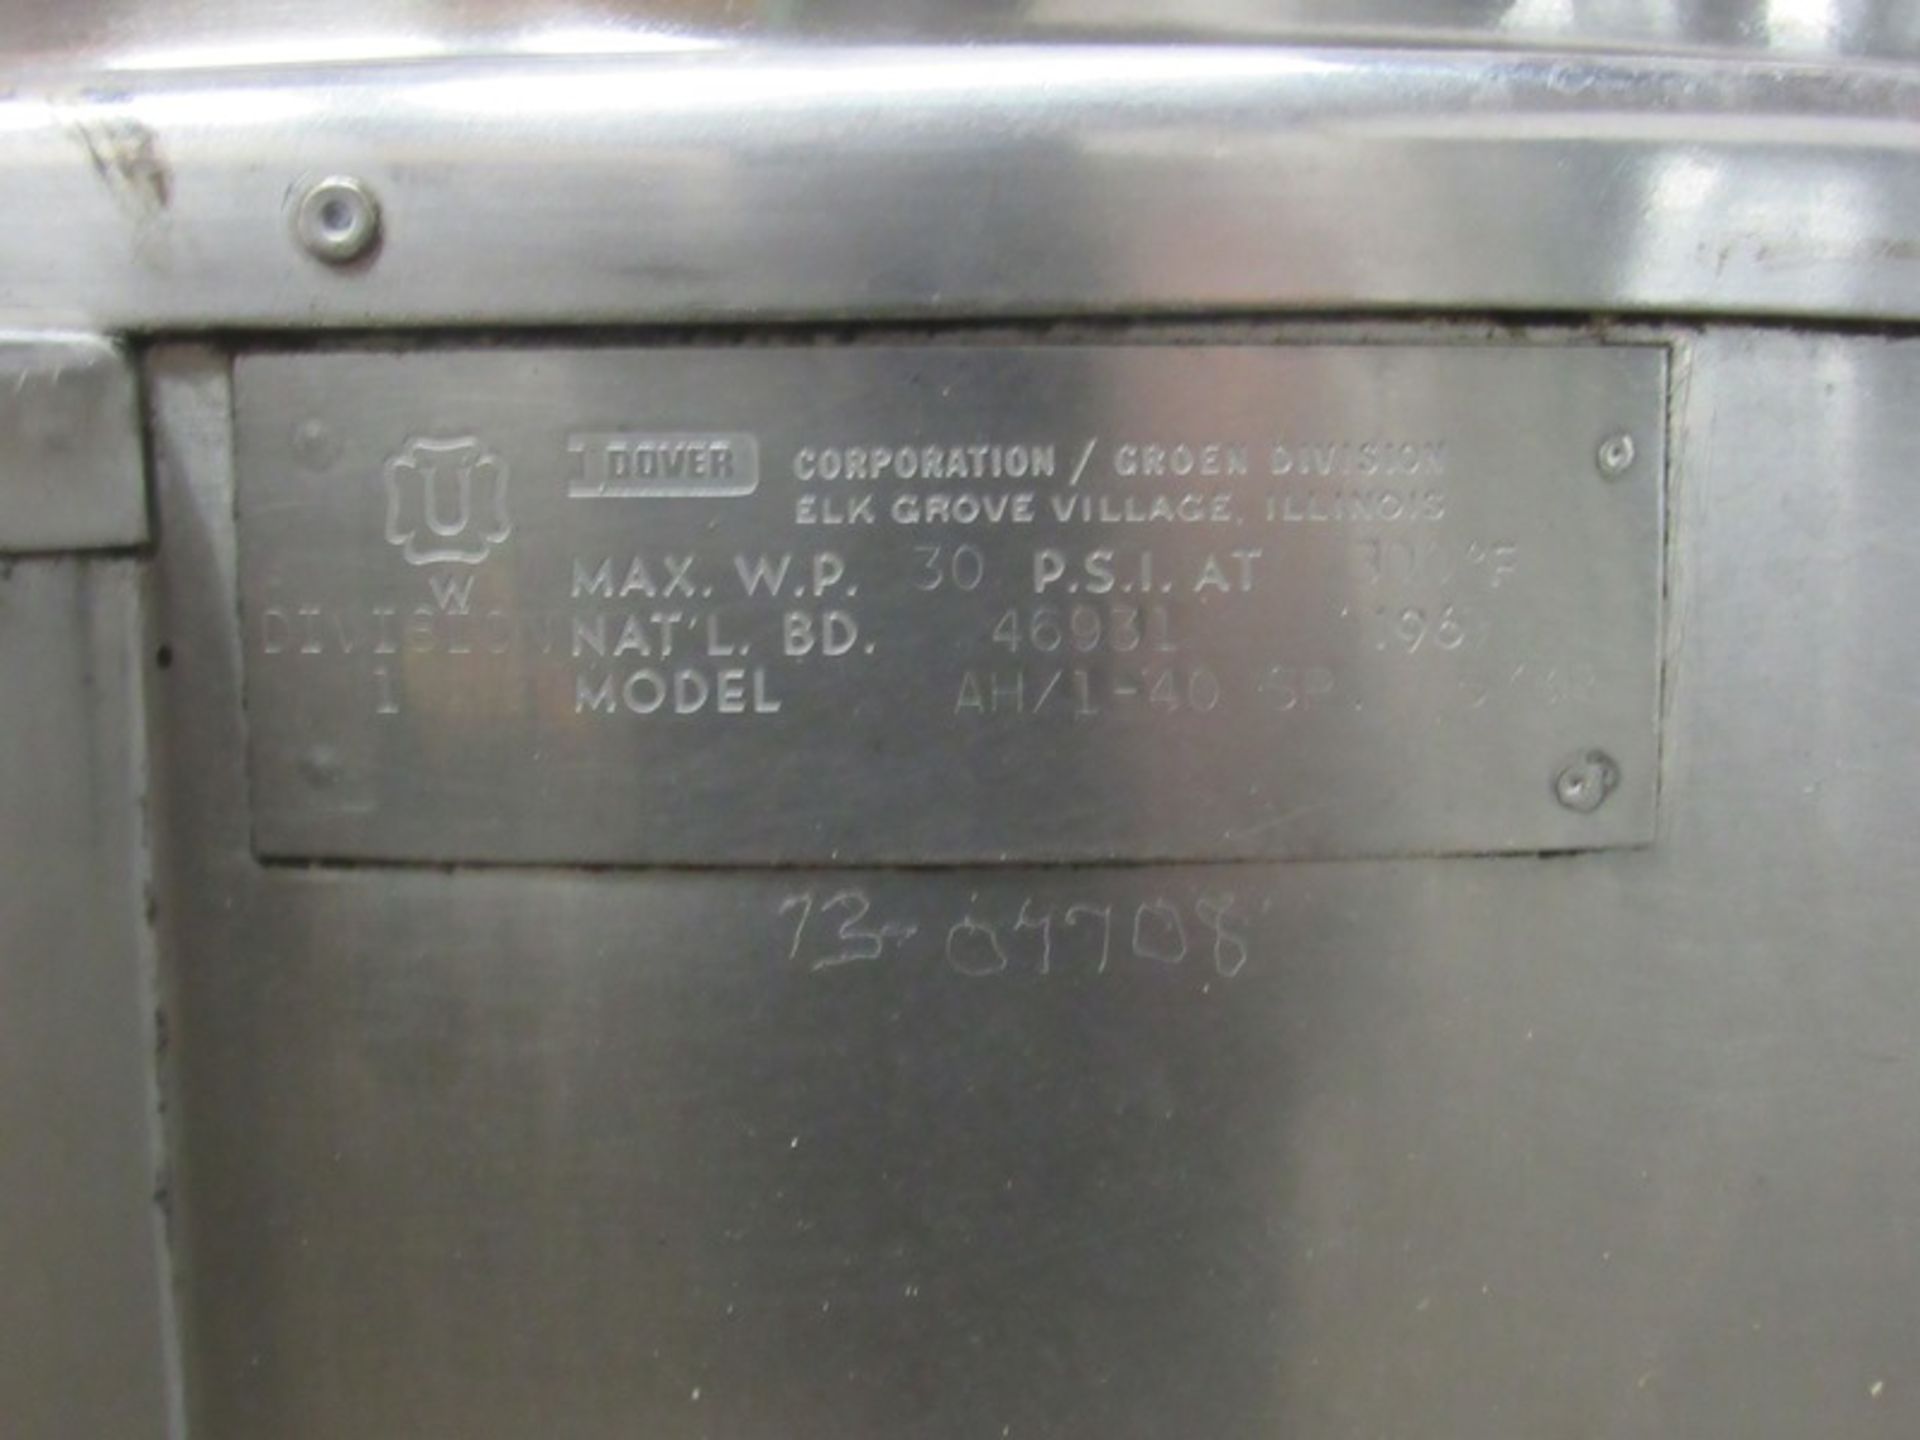 Groen Mdl. AH/1-40 Self Contained Kettle, natural gas fired, 115 volt controls, national board # - Image 7 of 7